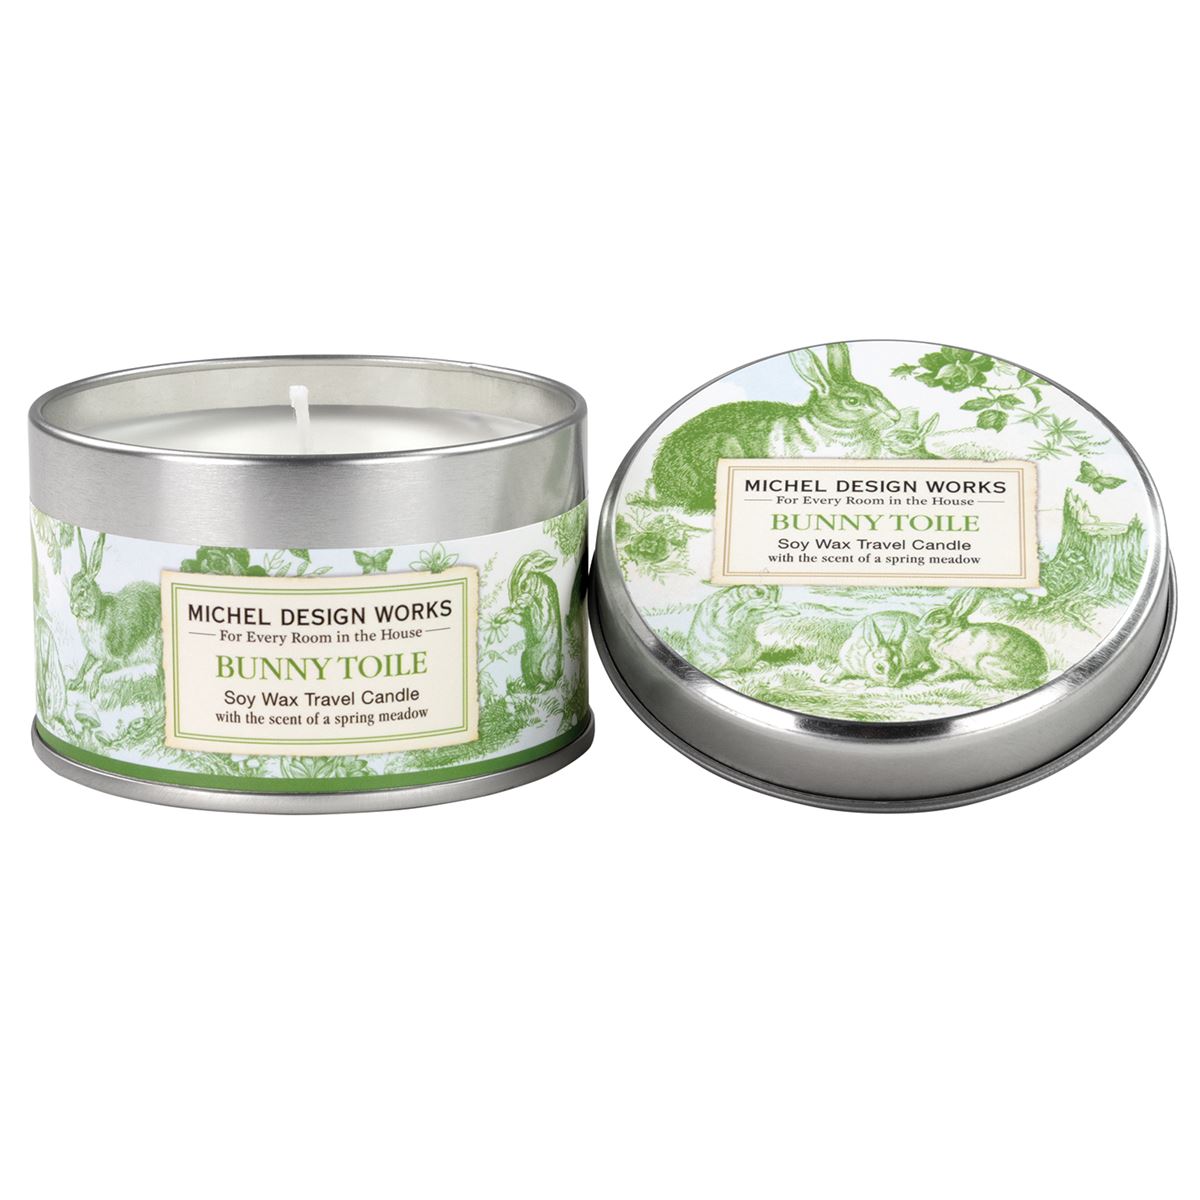 Michel Design Works Travel Tin Candle - 4 oz. - Bunny Toile